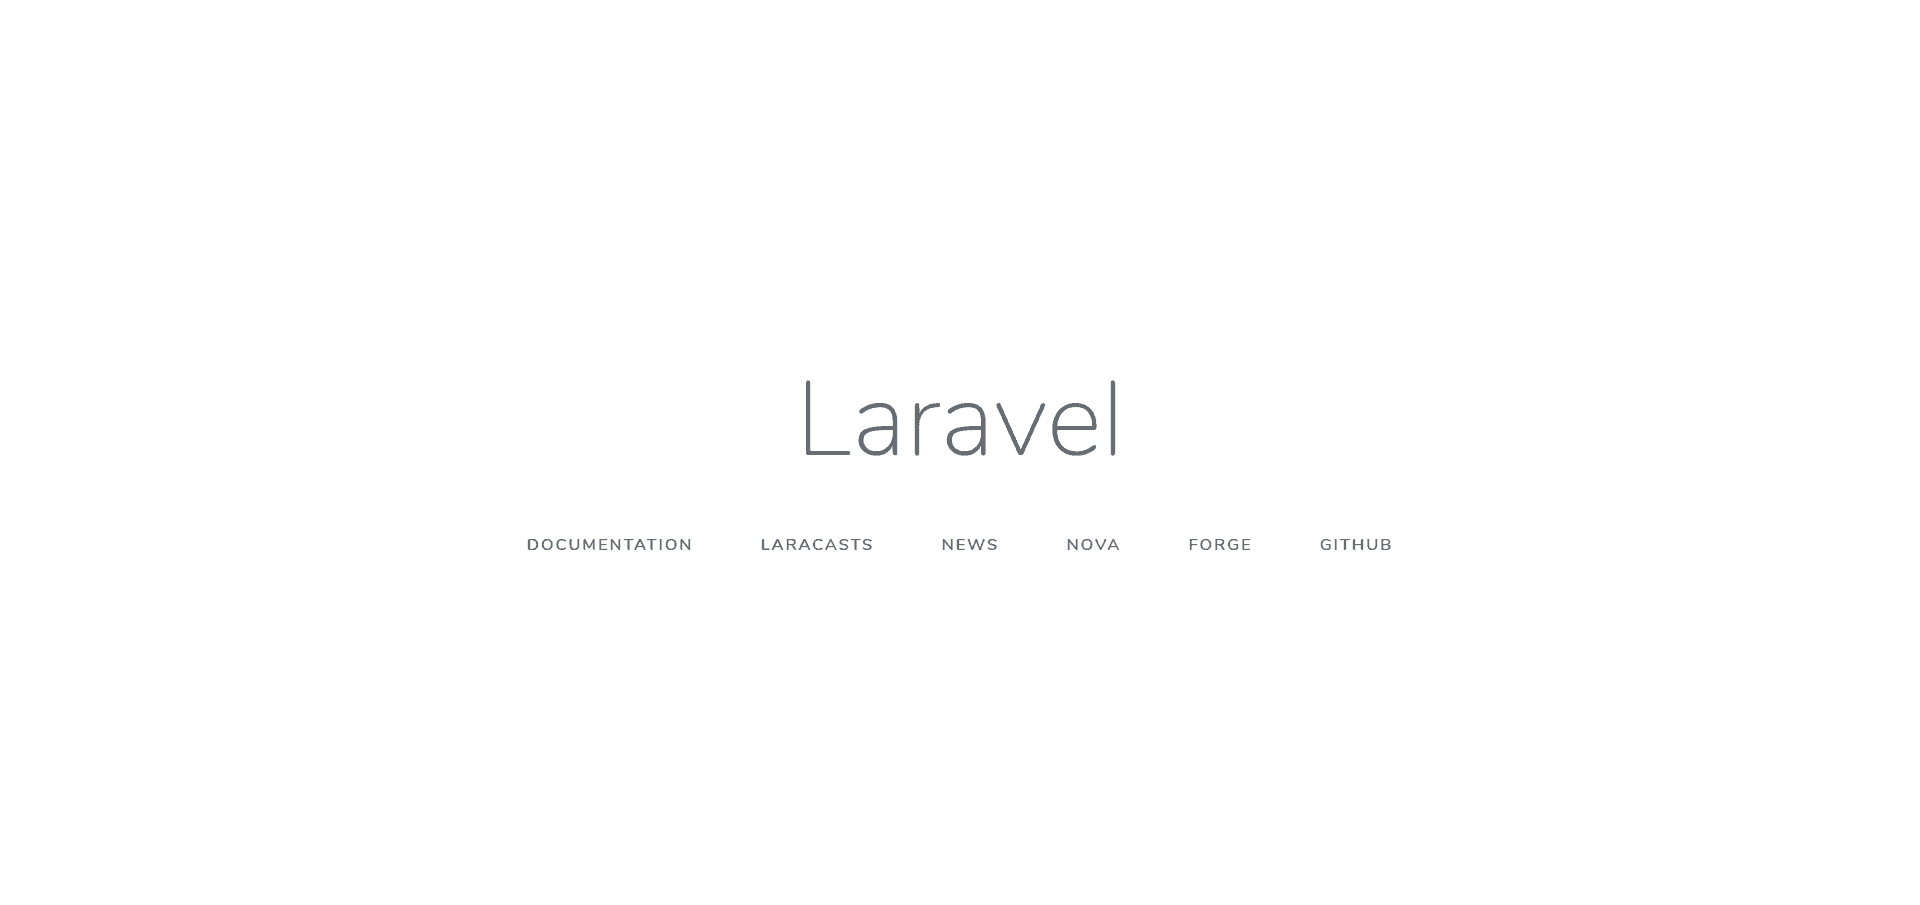 PHP Laravel Tutorial: this is the view you will get once you installed Laravel succesfully.